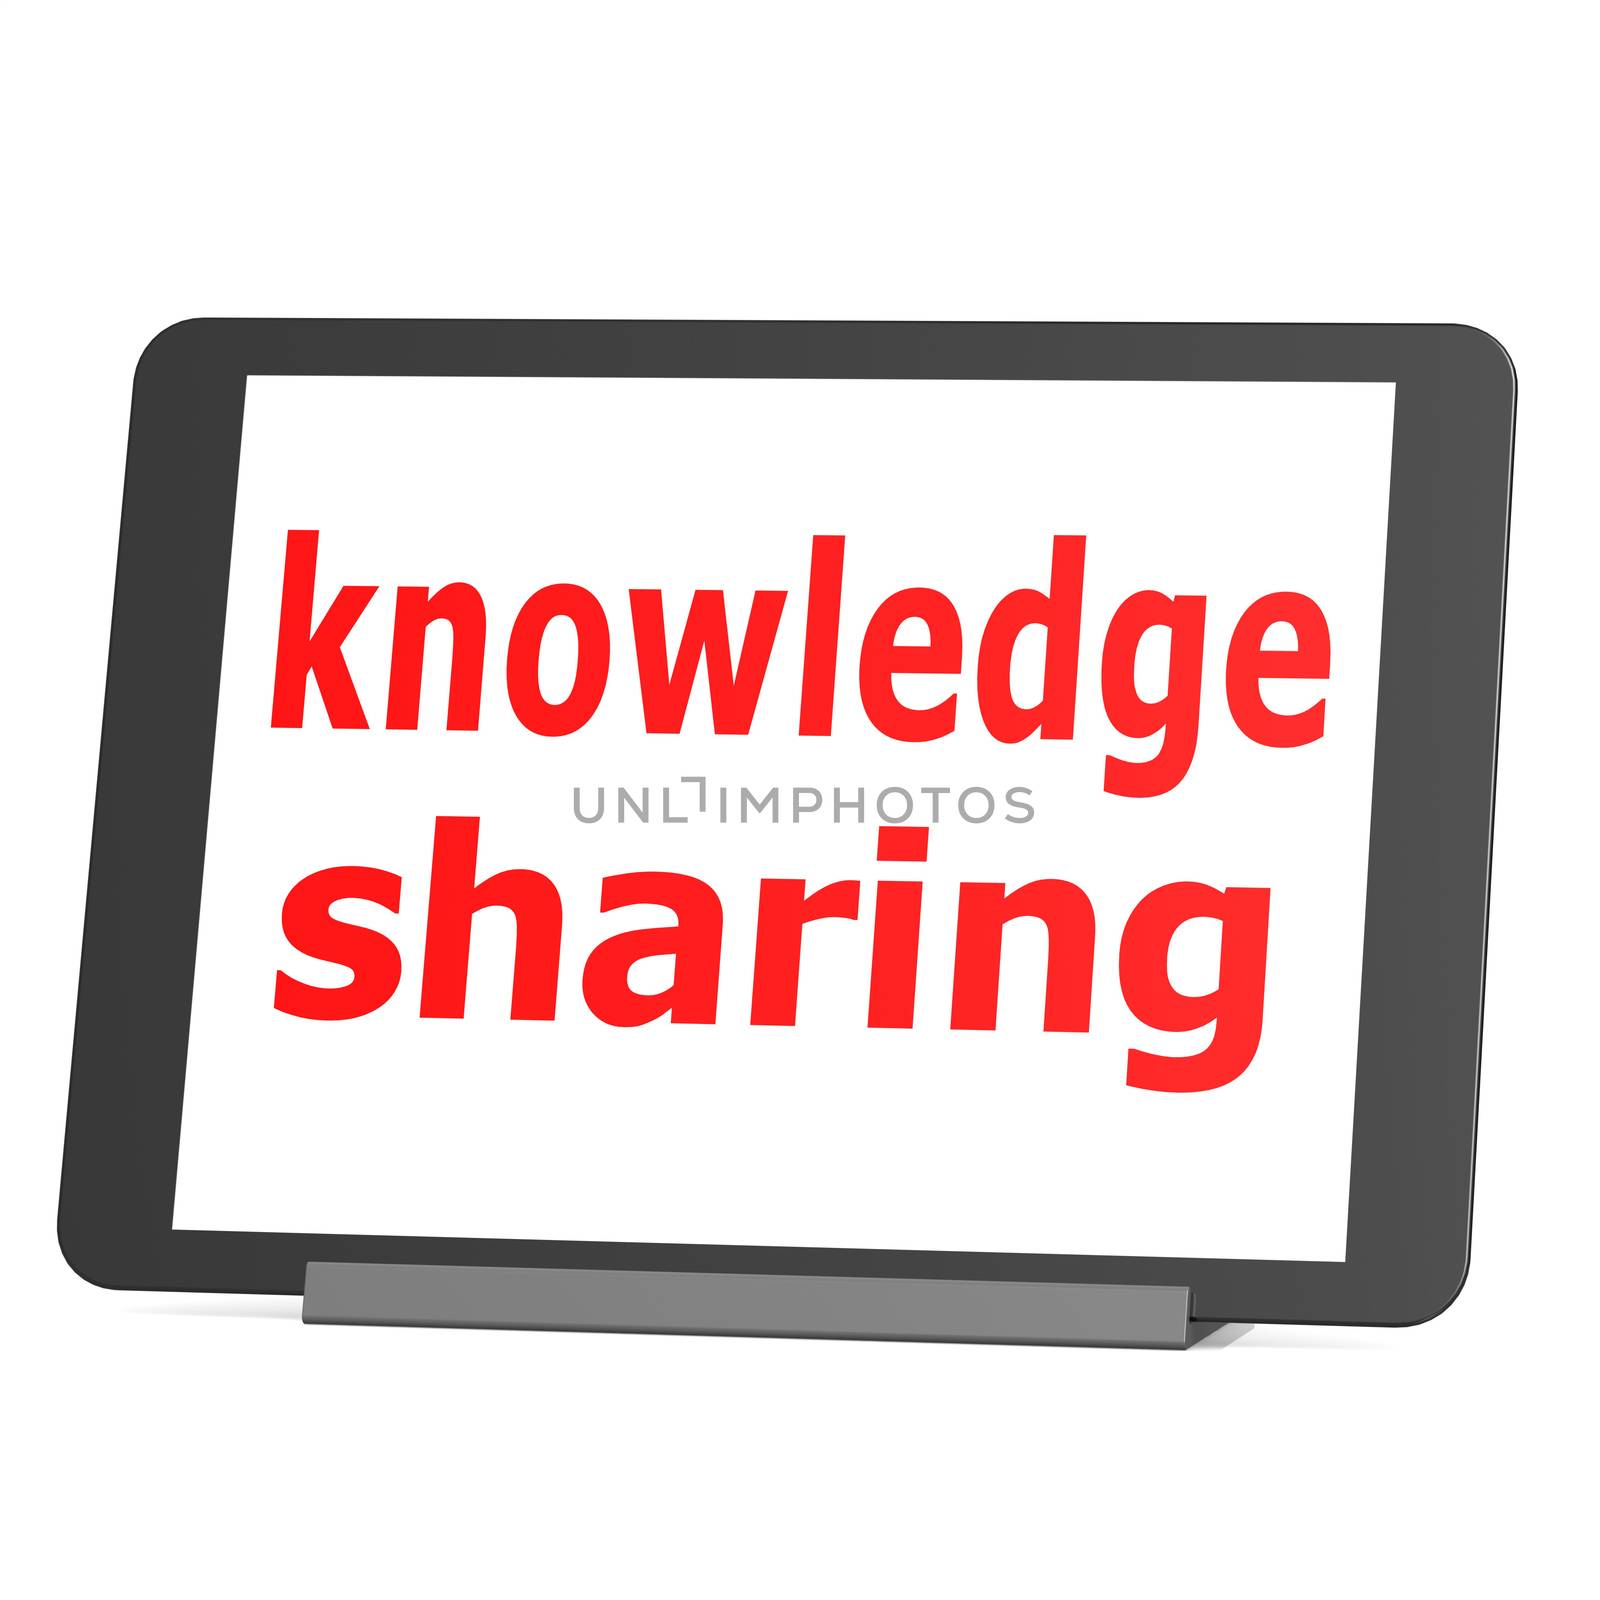 Table knowledge sharing